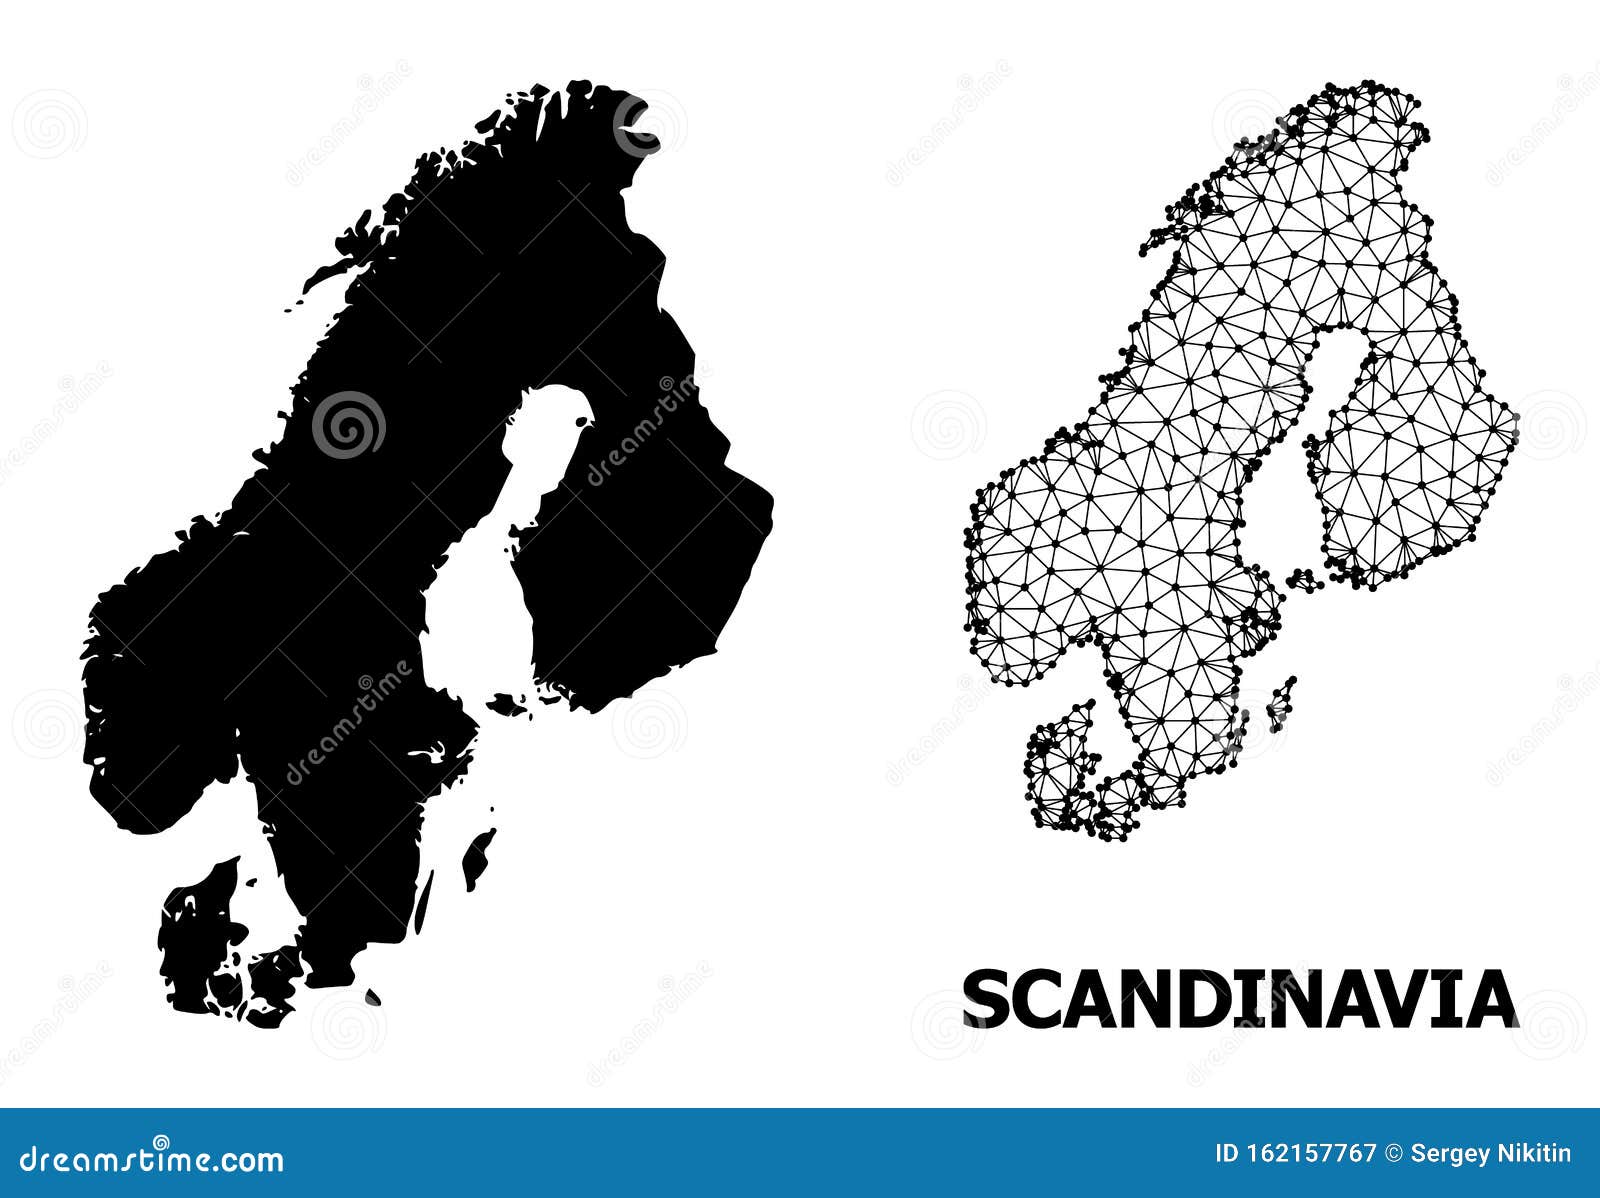 solid and wire frame map of scandinavia